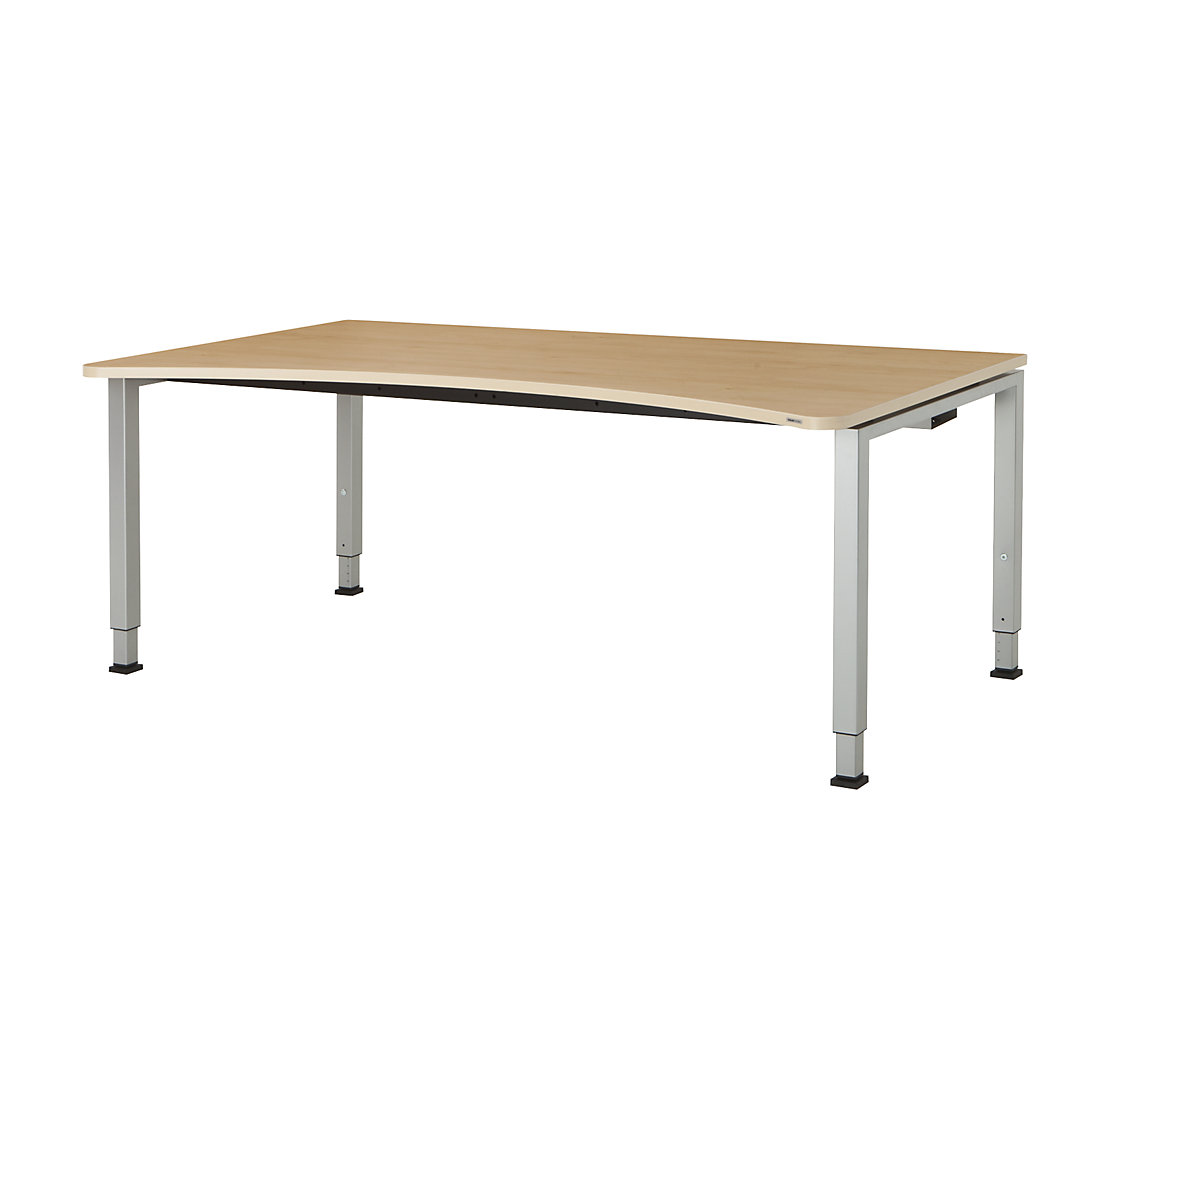 Free-form table, height adjustable - mauser